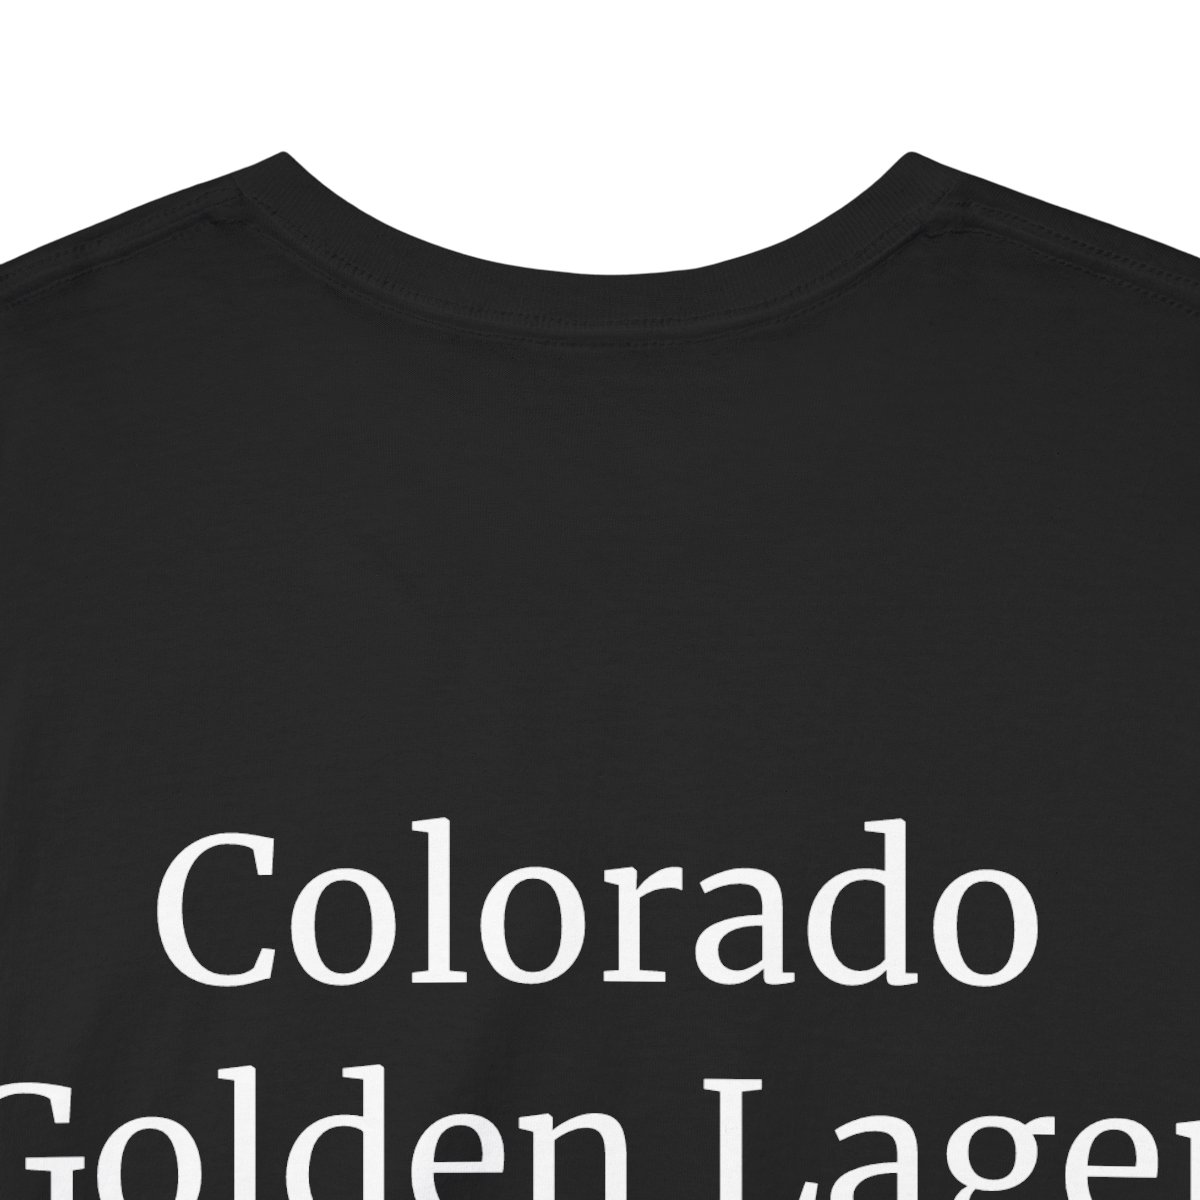 Colorado Golden Lager  product thumbnail image